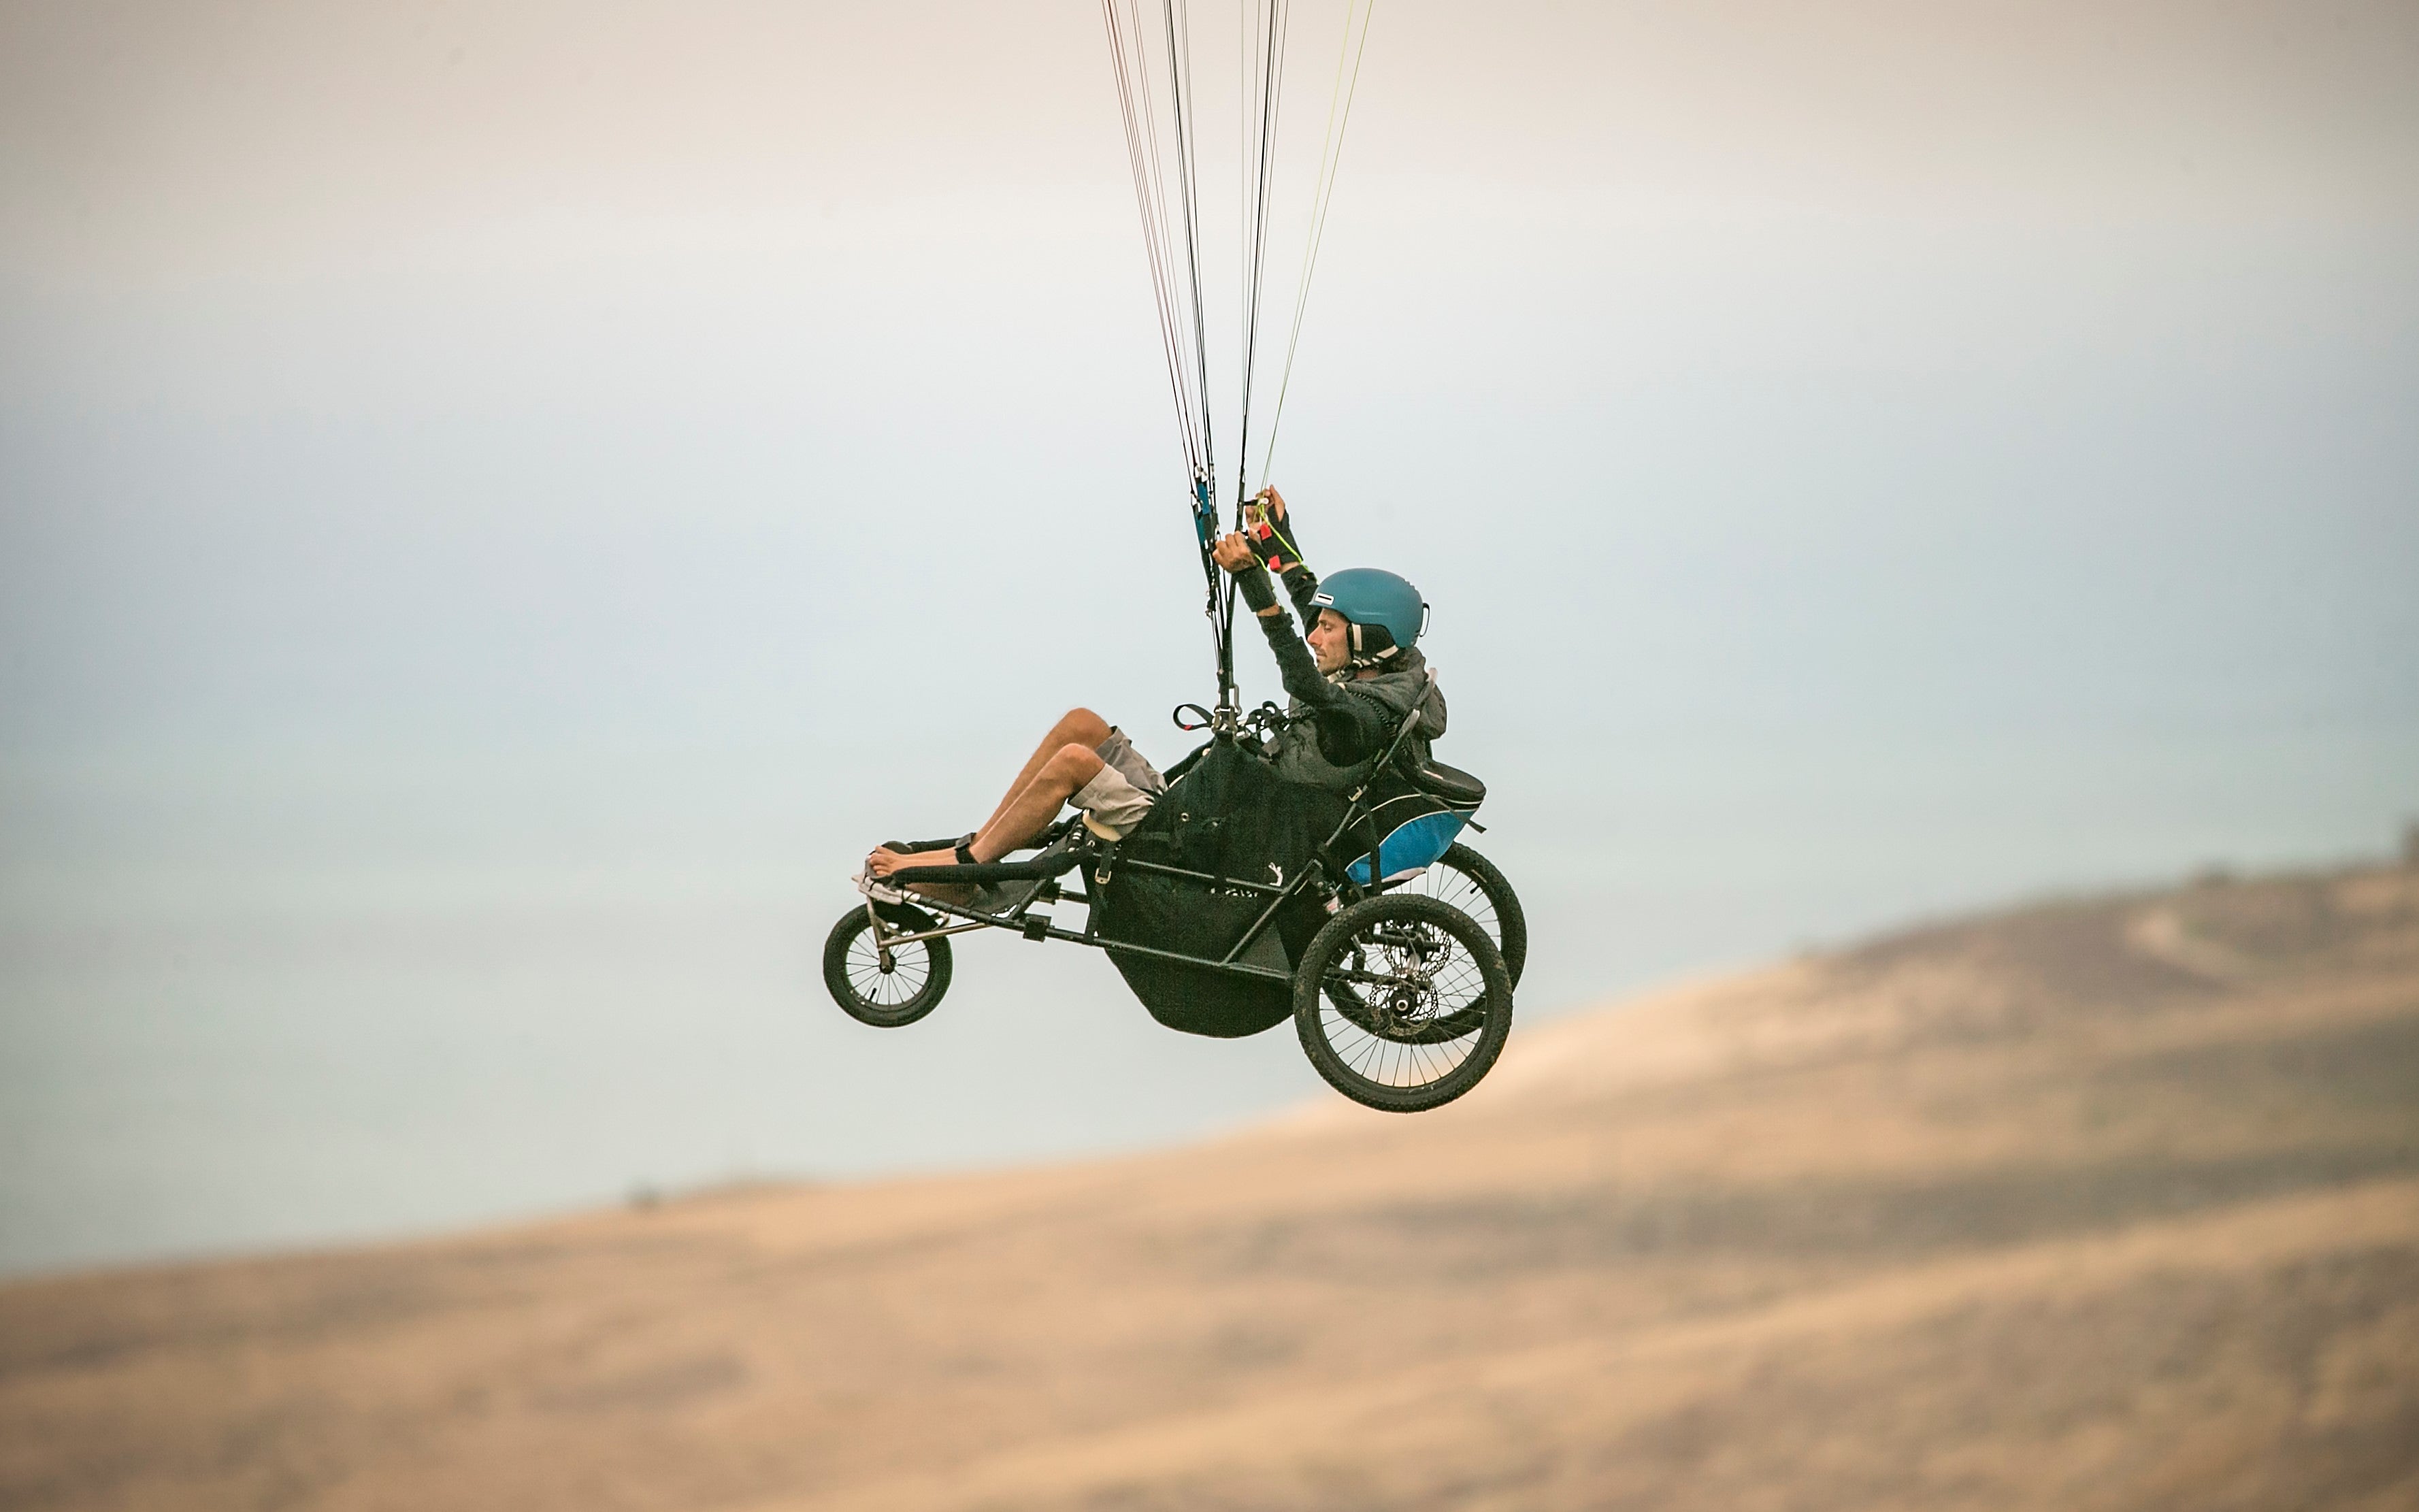 Jezza Williams who has Tetraplegia or quadriplegia is paragliding solo while seated in a buggy with 